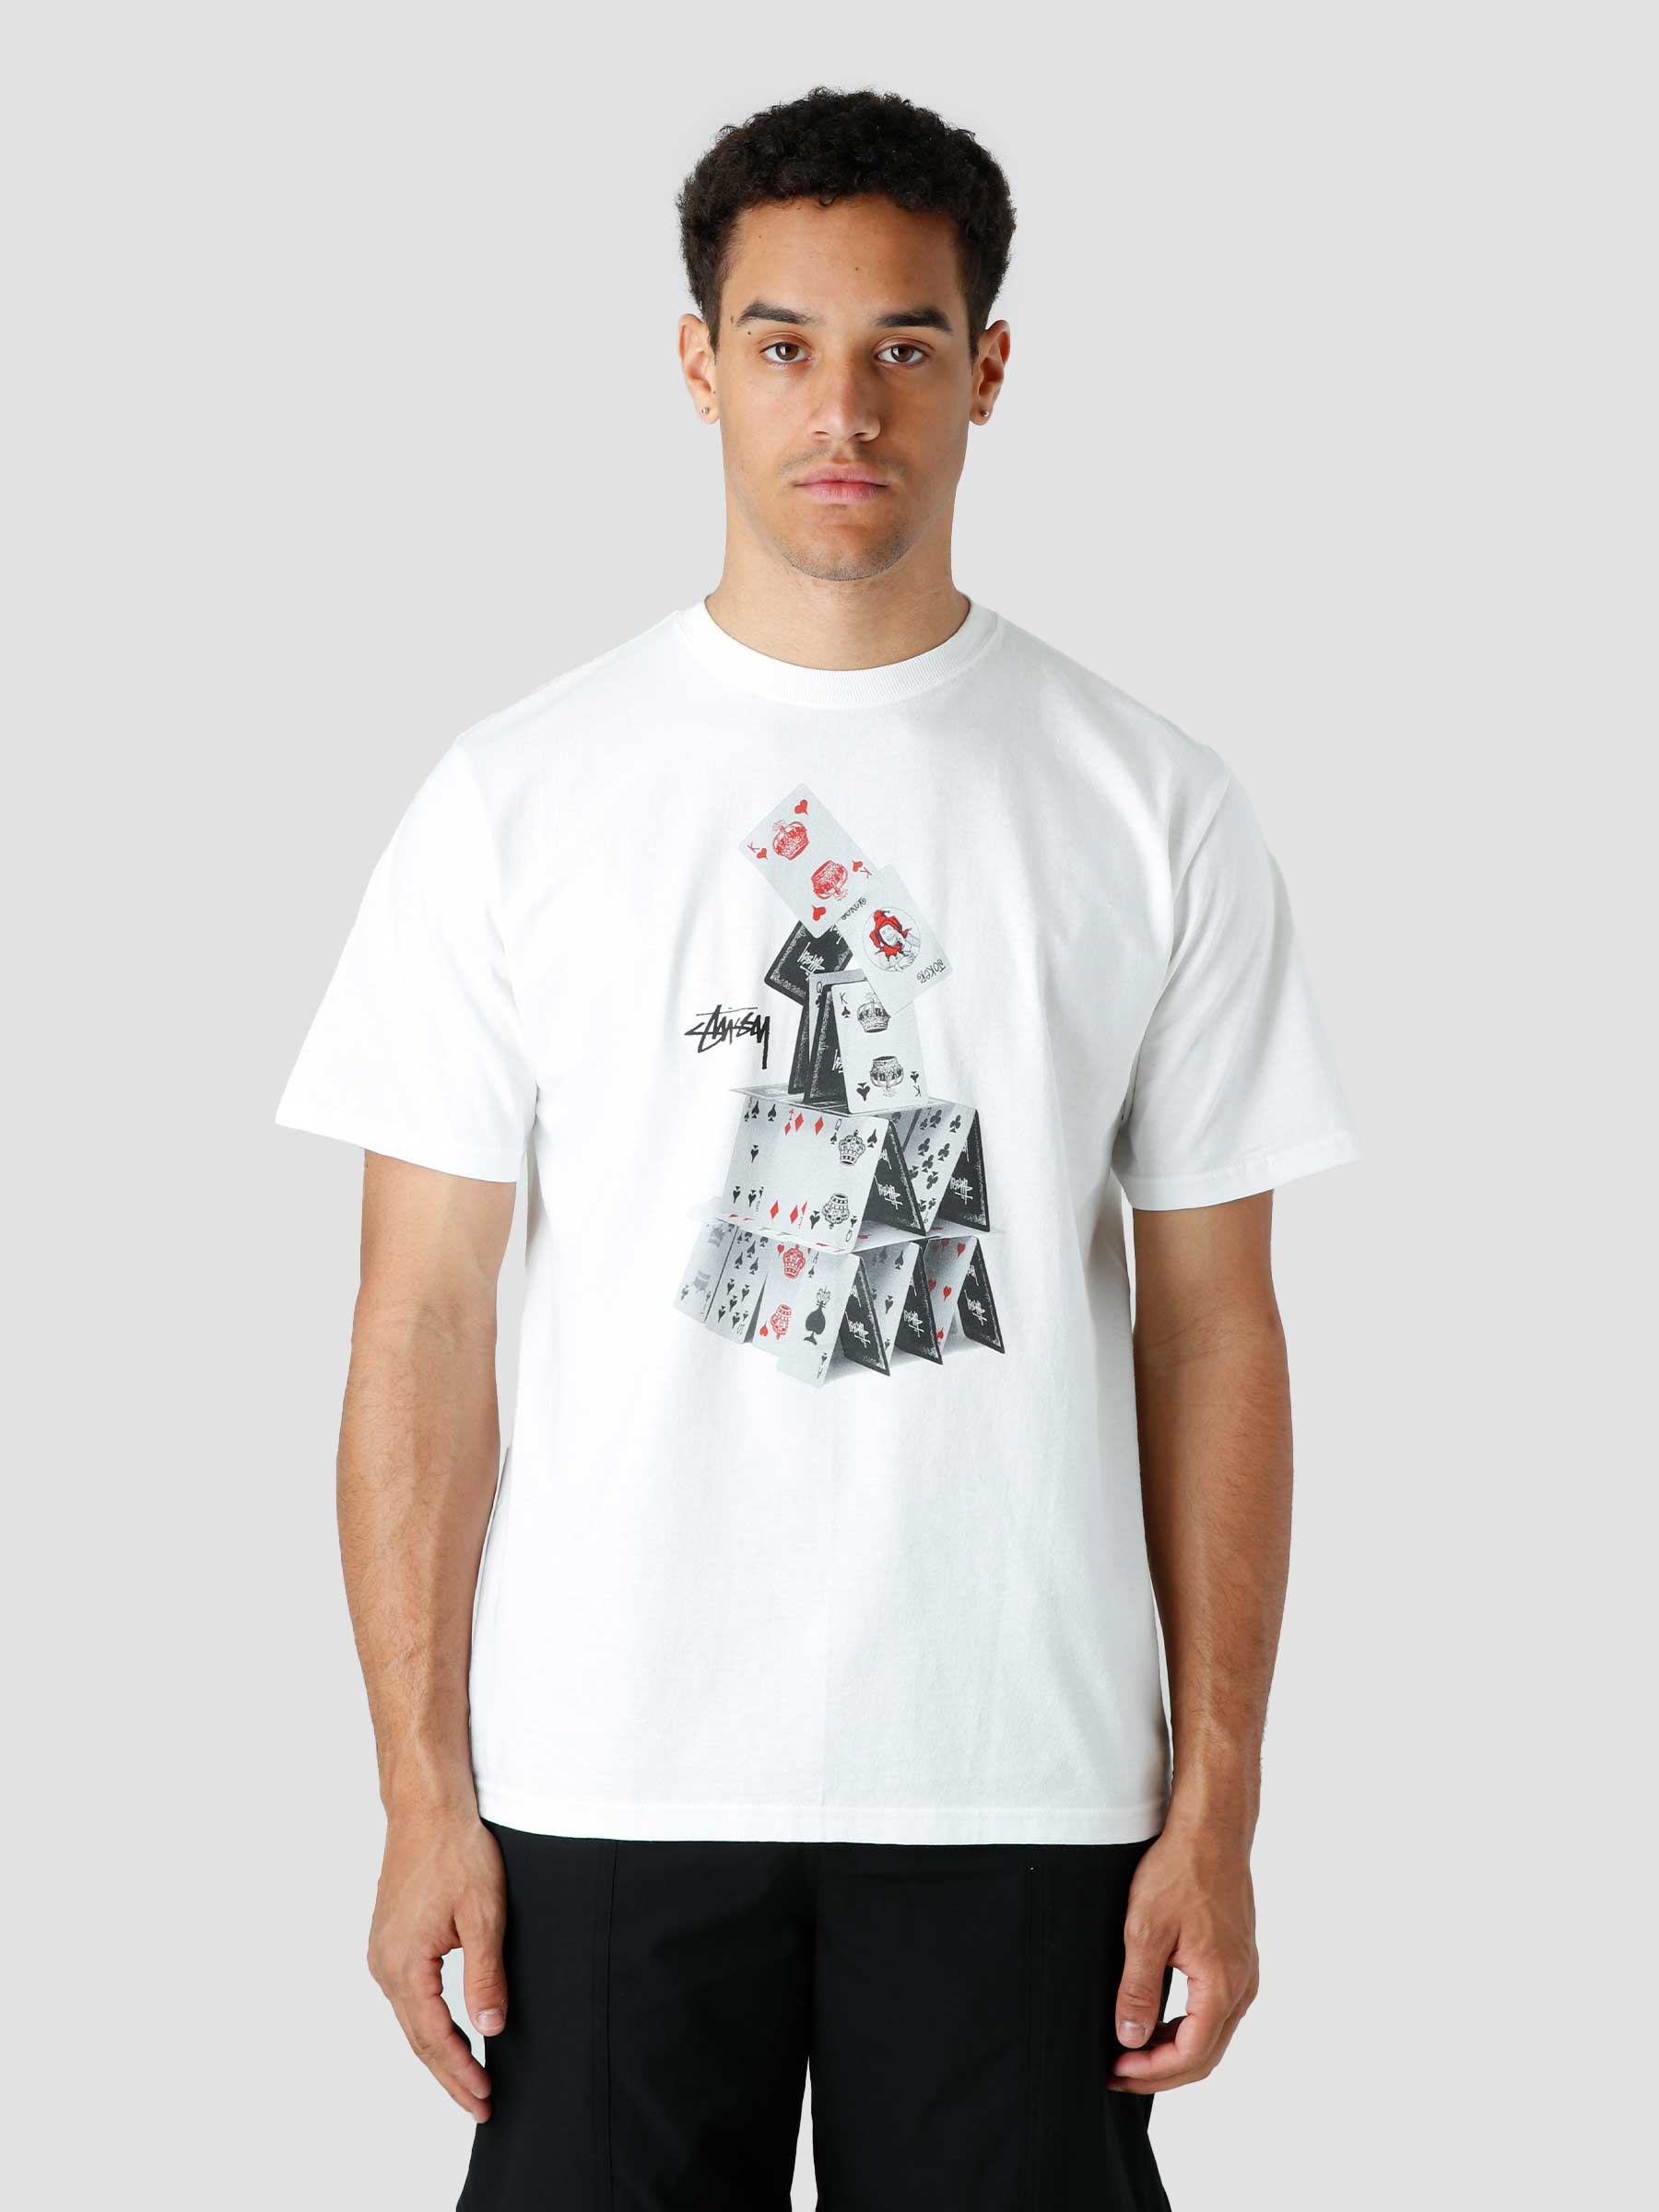 outfit picks week 21 Stüssy House Of Cards T-shirt